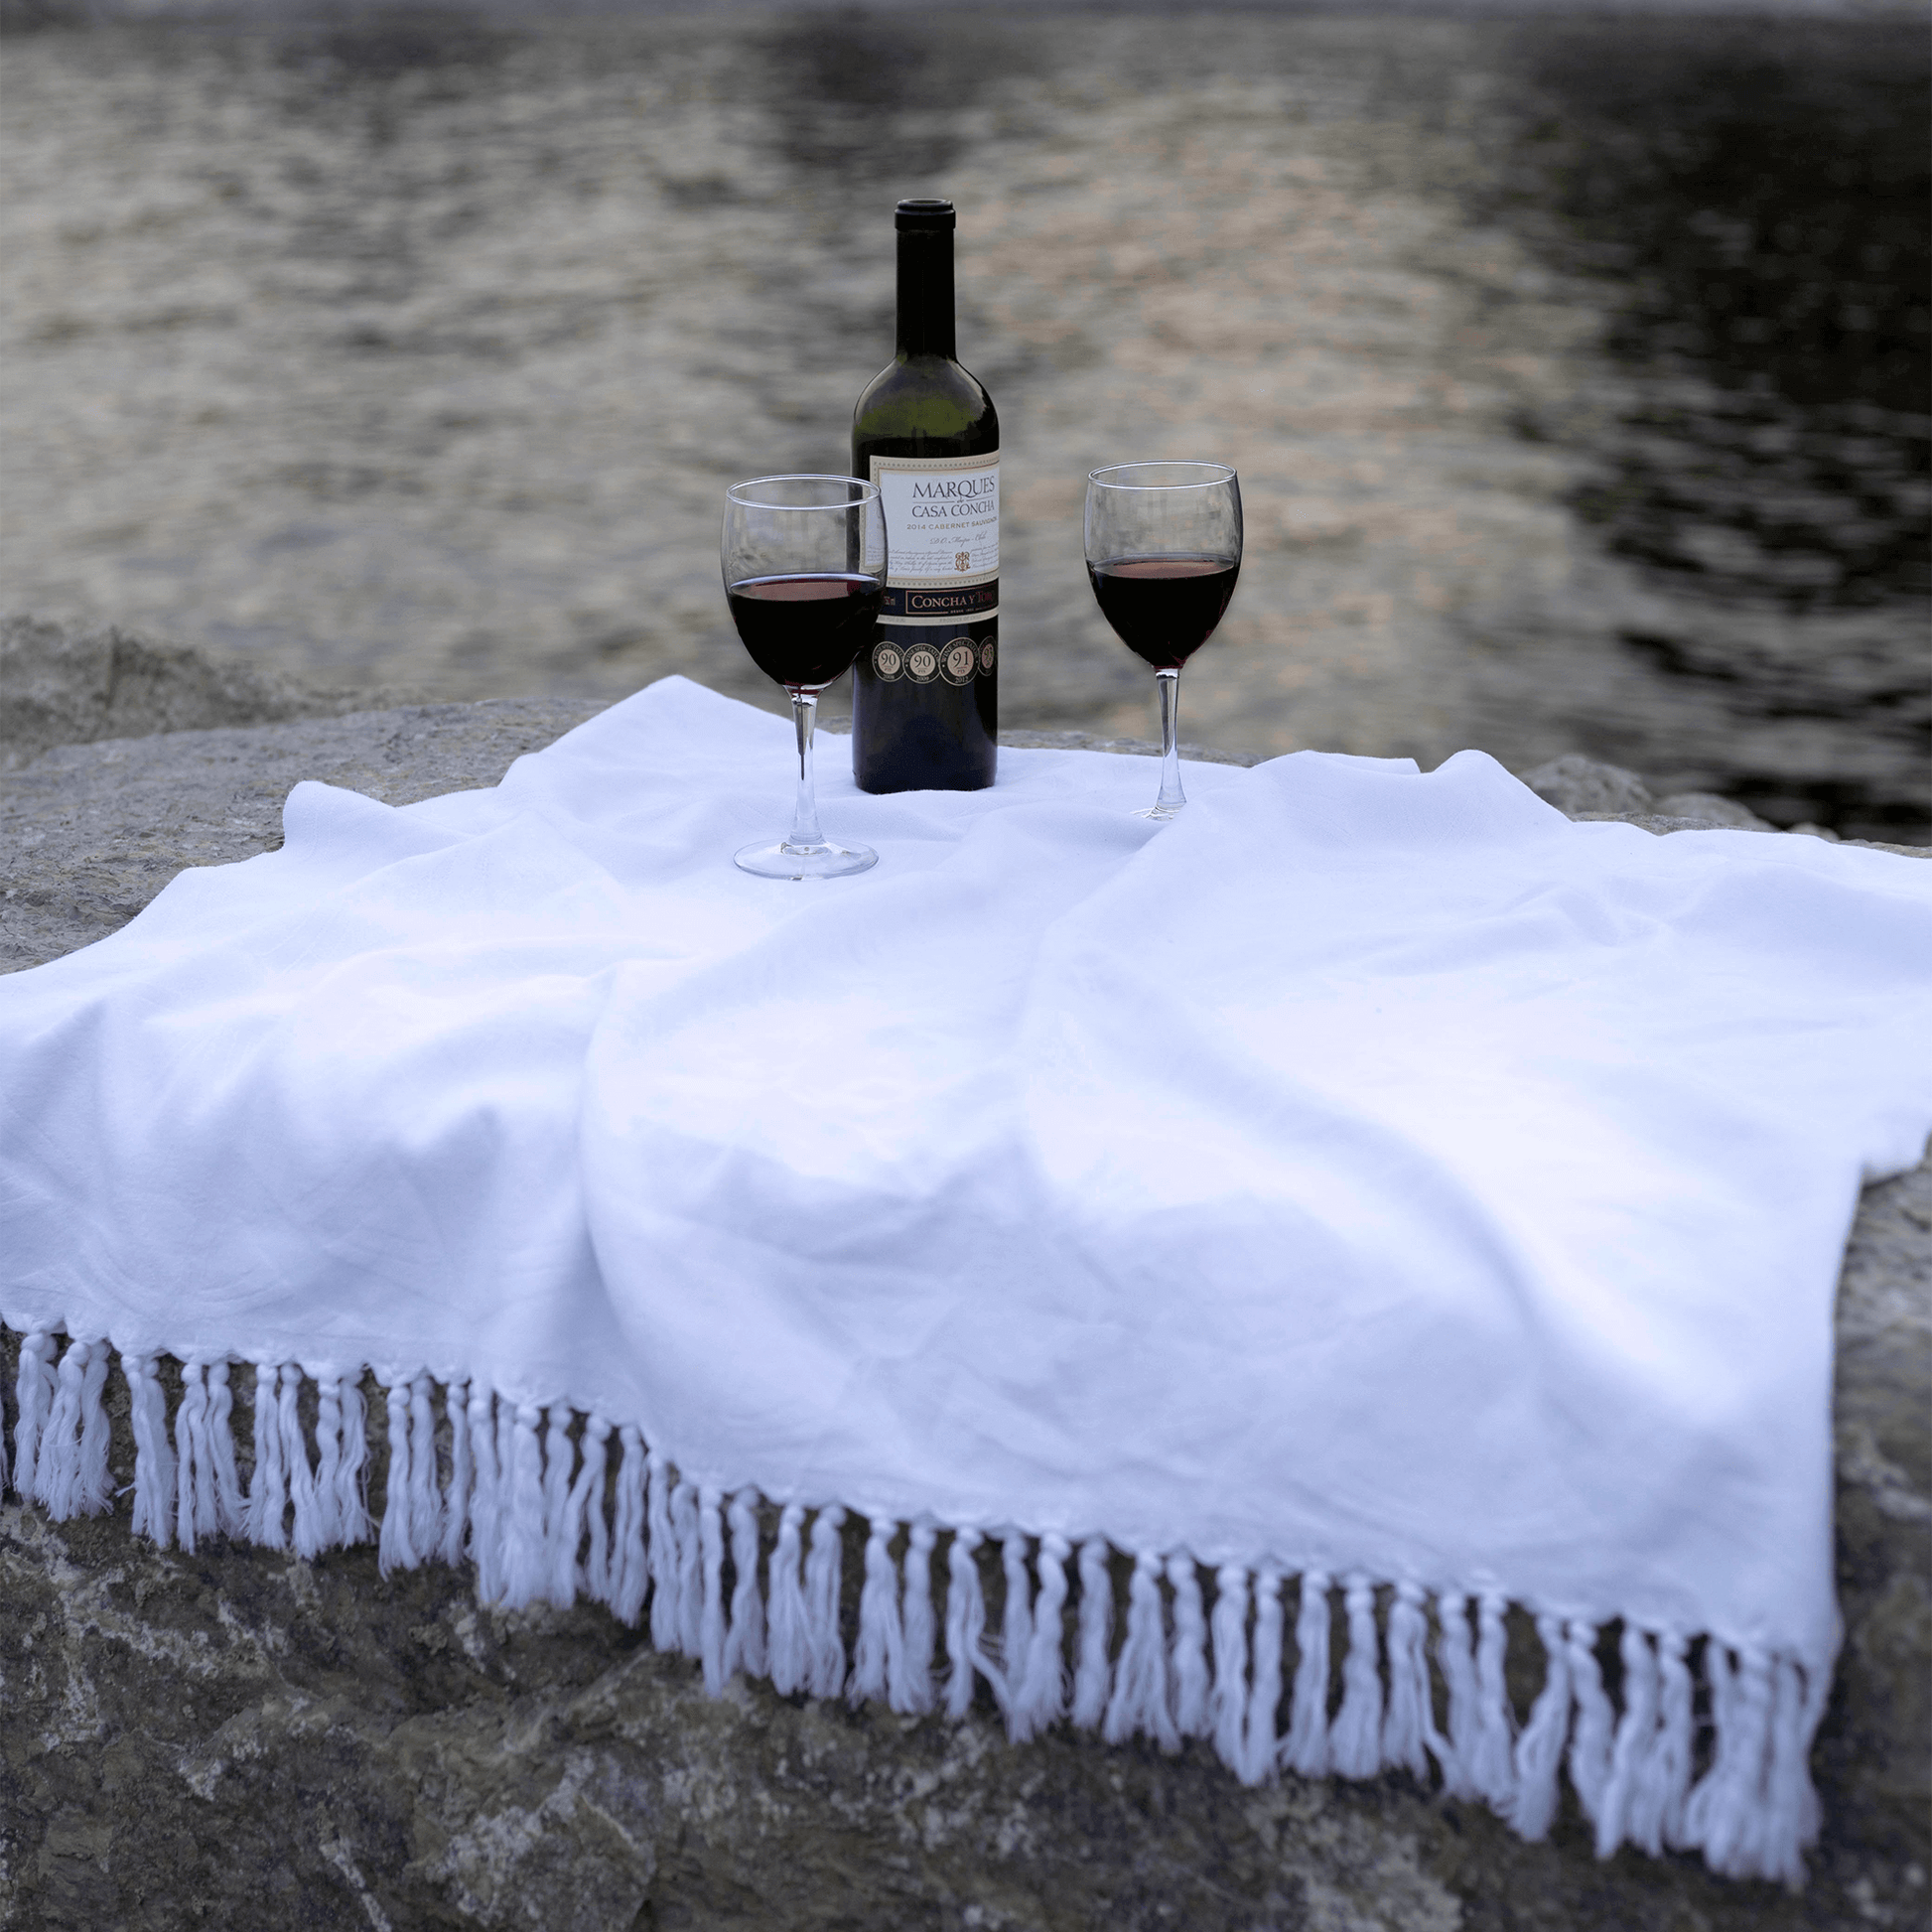 White Turkish towel near the water with wine glasses